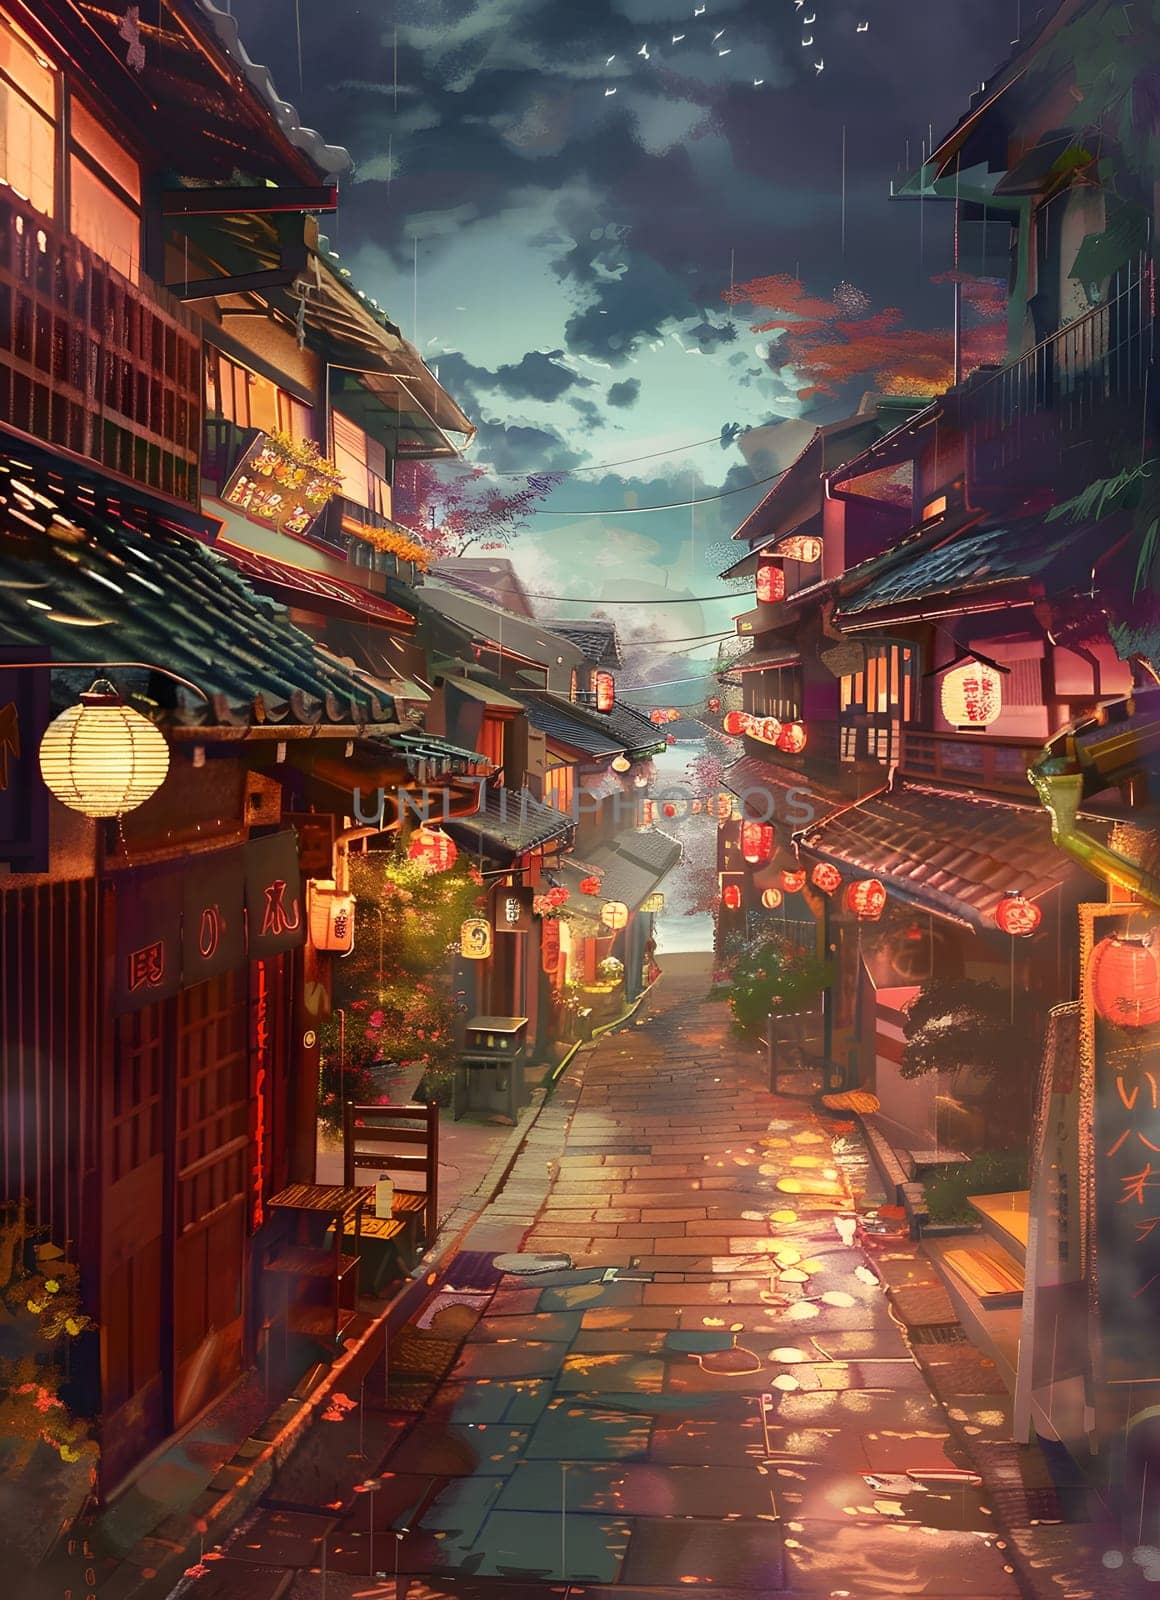 A painting of a city street at night with buildings, lanterns, and a cloudy sky by Nadtochiy